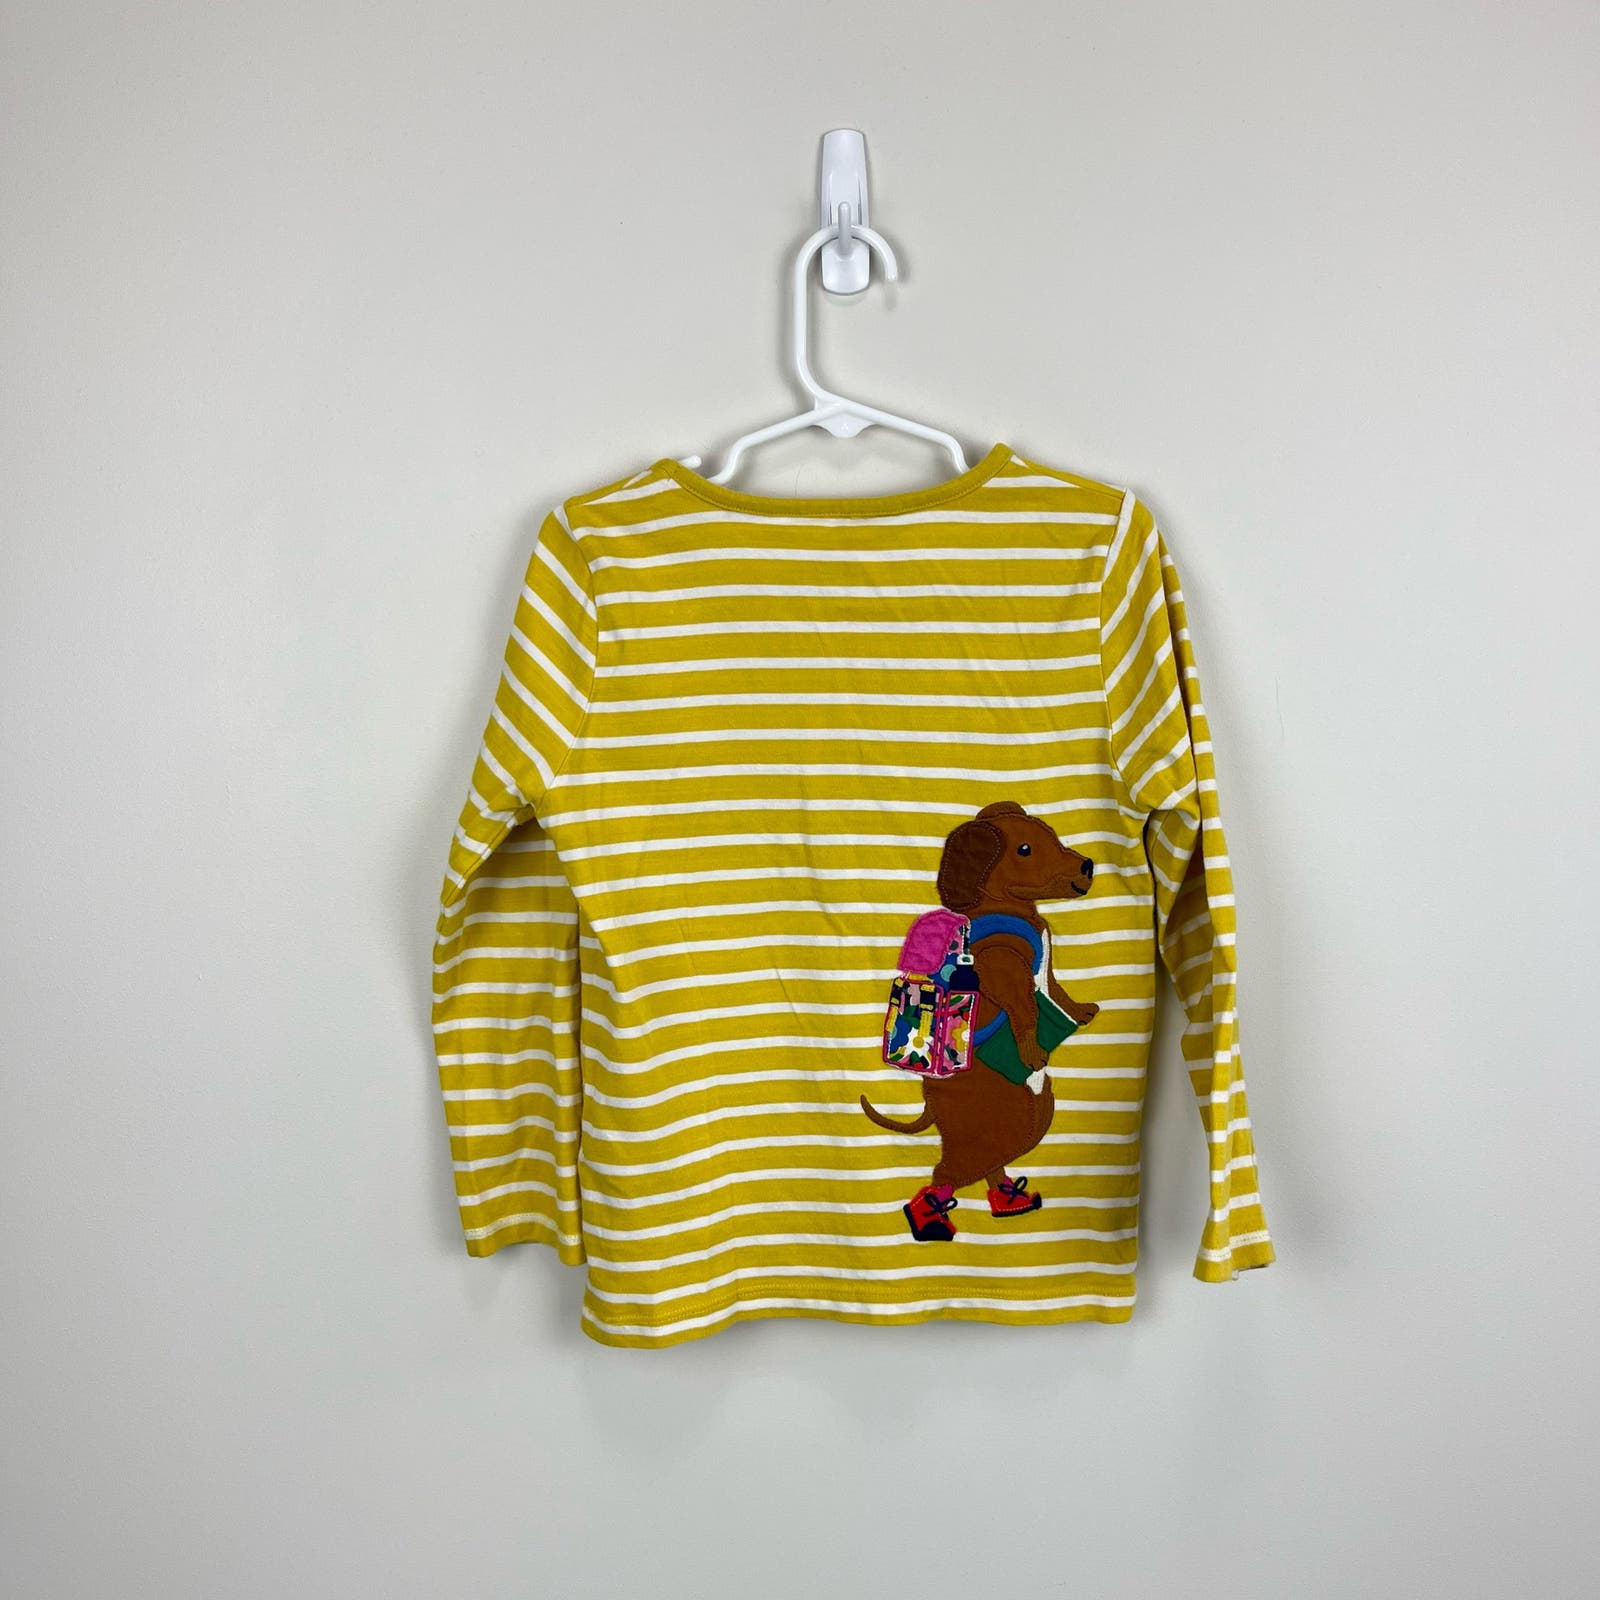 Mini Boden Front & Back T-shirt Yellow Ivory Animals 5-6